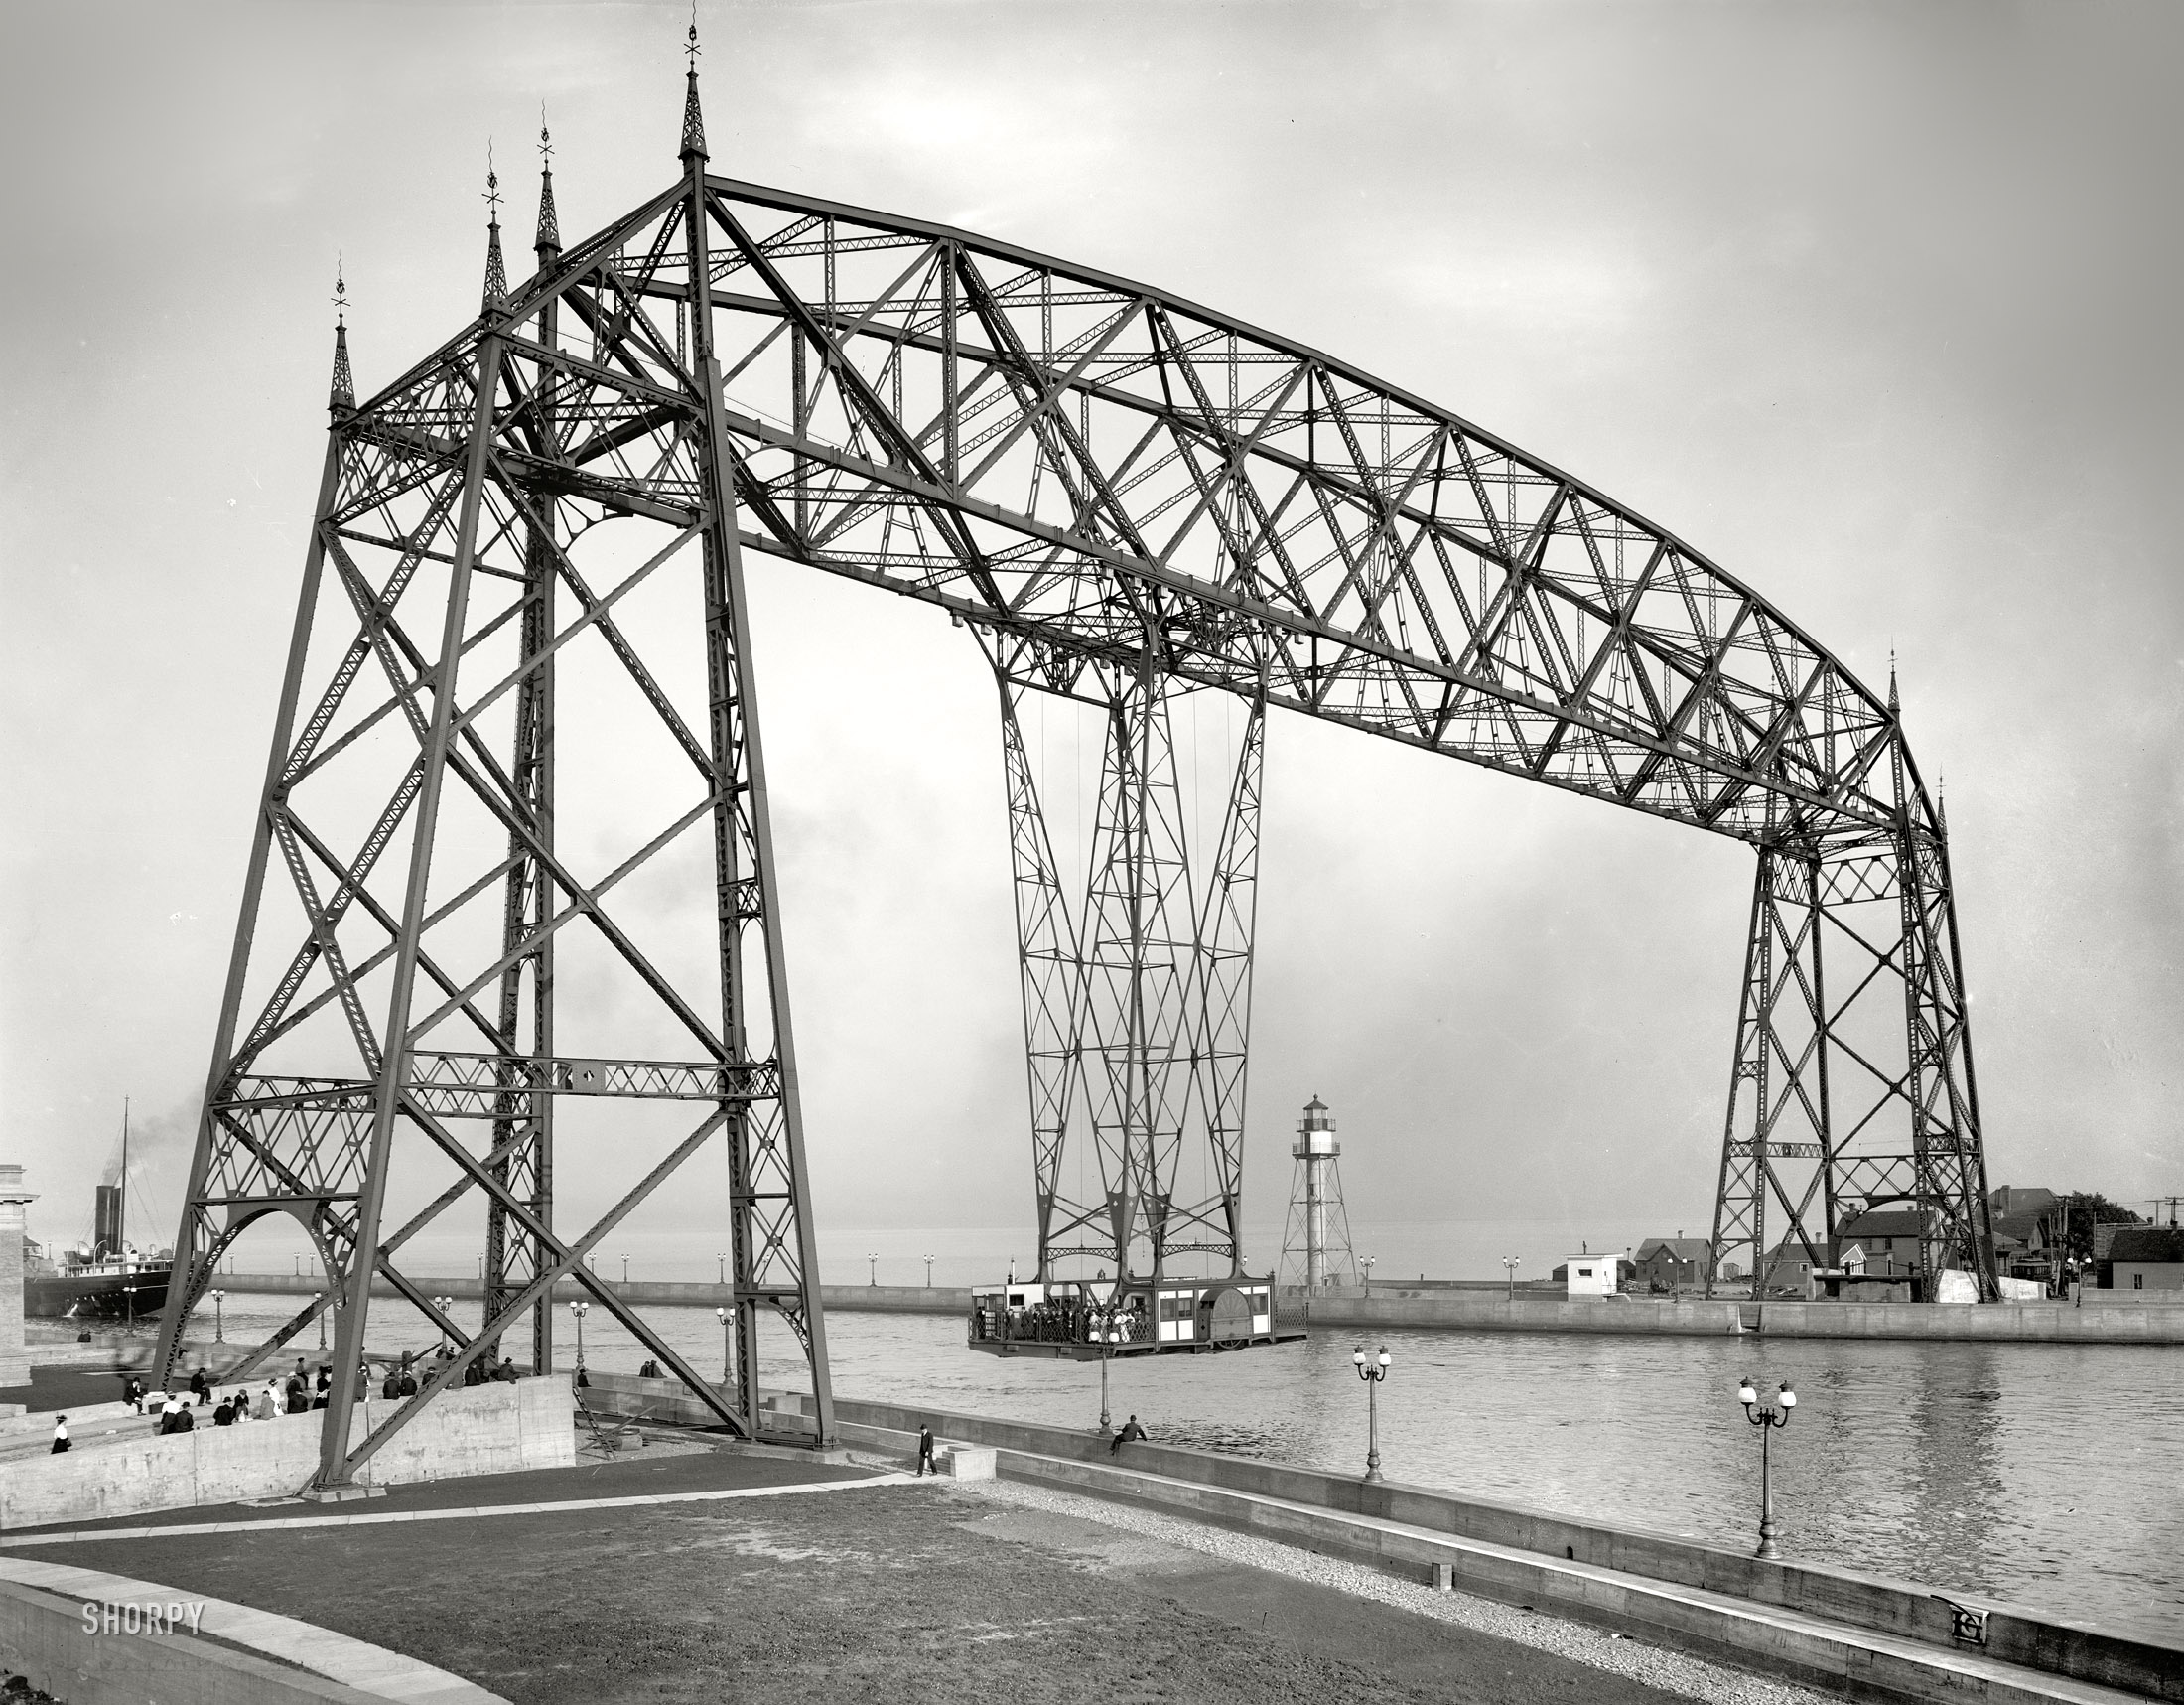 Circa 1907. "Aerial bridge. Duluth, Minnesota." Suspended Car Transfer over the Duluth Ship Canal. The gondola could carry 60 tons of cargo across the 300-foot channel with minimal obstruction of the shipping lane. After modification for service as a vertical lift, the span became known as the Aerial Lift Bridge. 8x10 dry plate glass negative, Detroit Publishing Company. View full size.